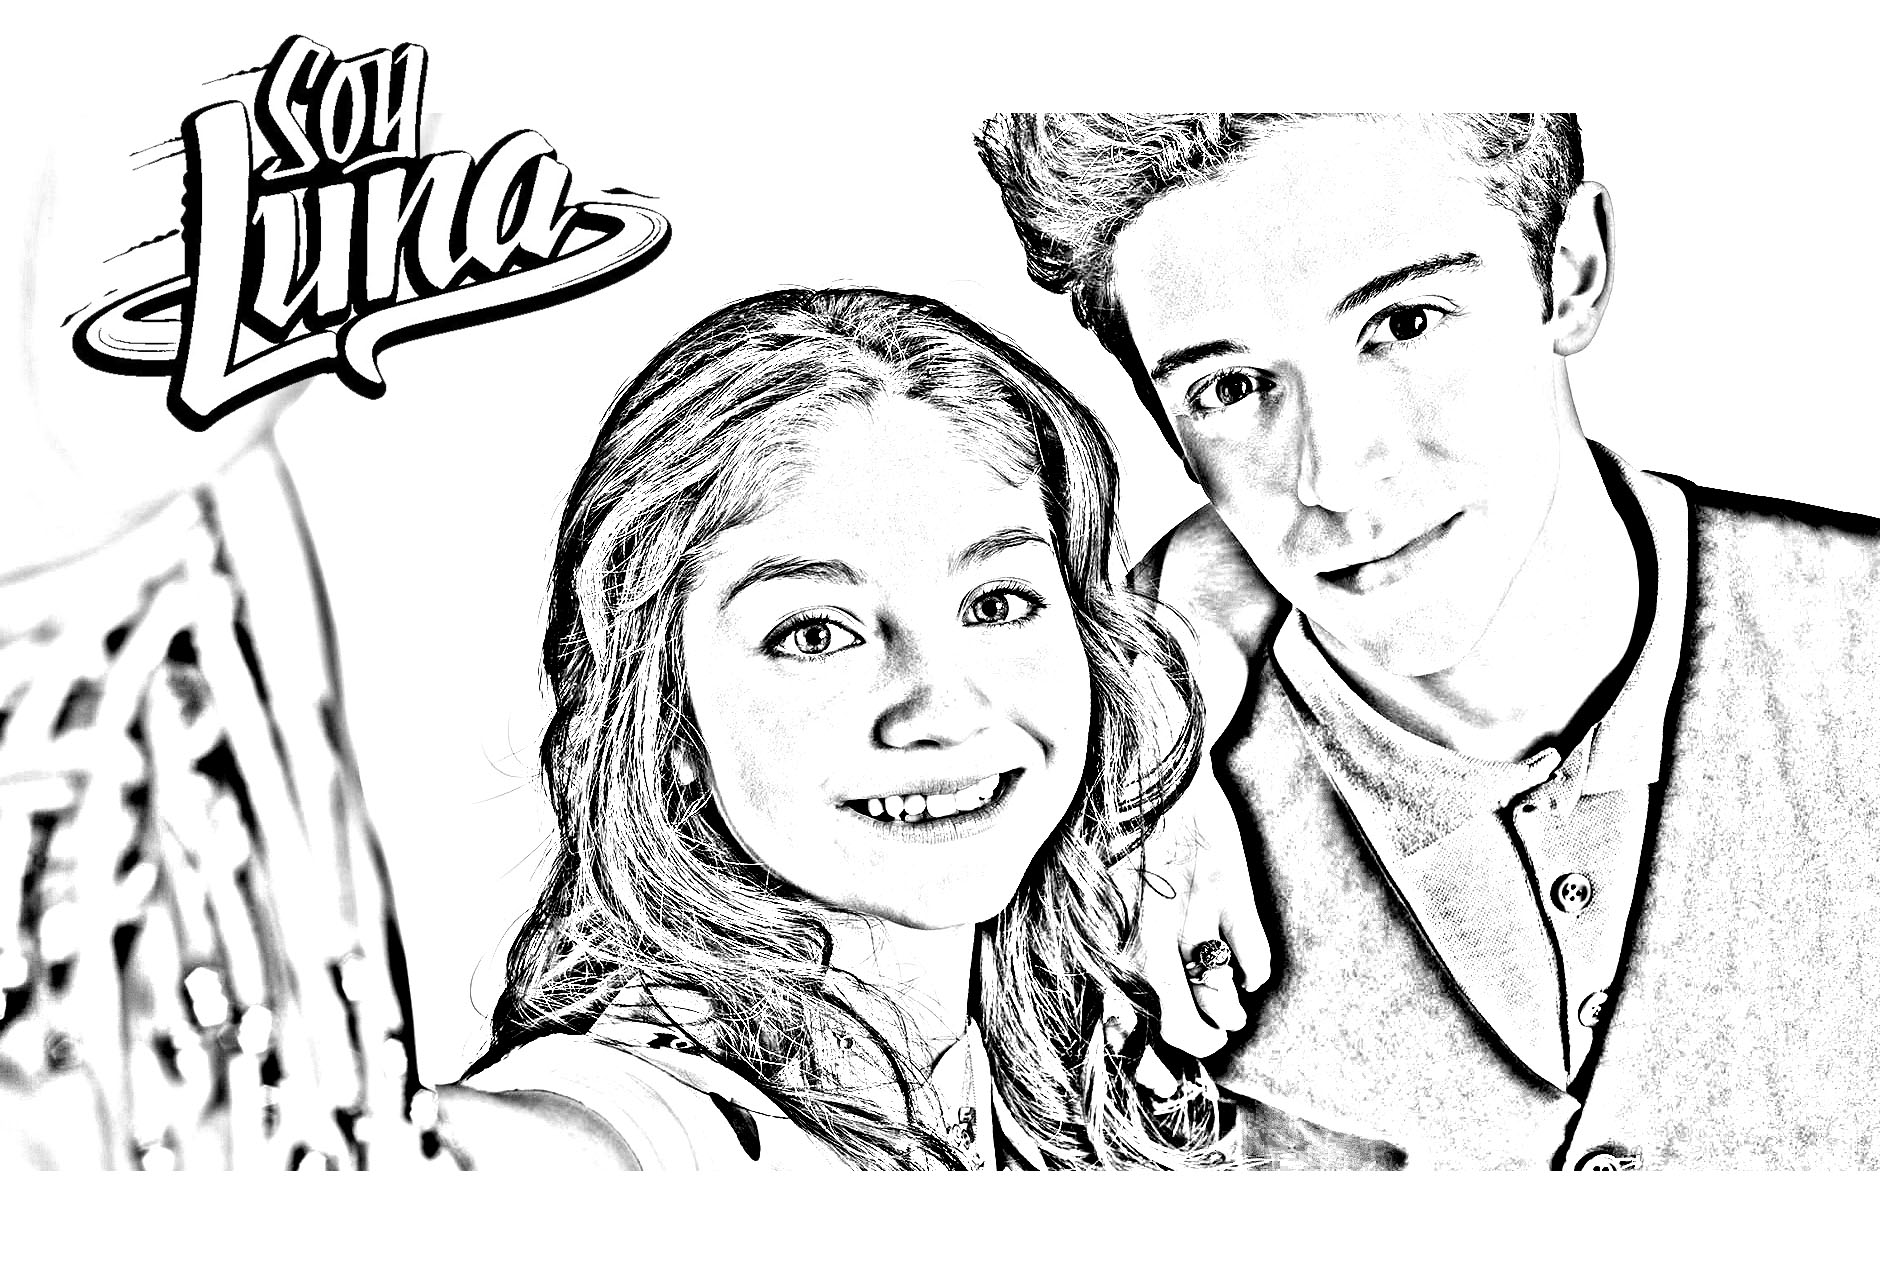 Free Soy Luna drawing to download and color - Soy Luna Kids Coloring Pages